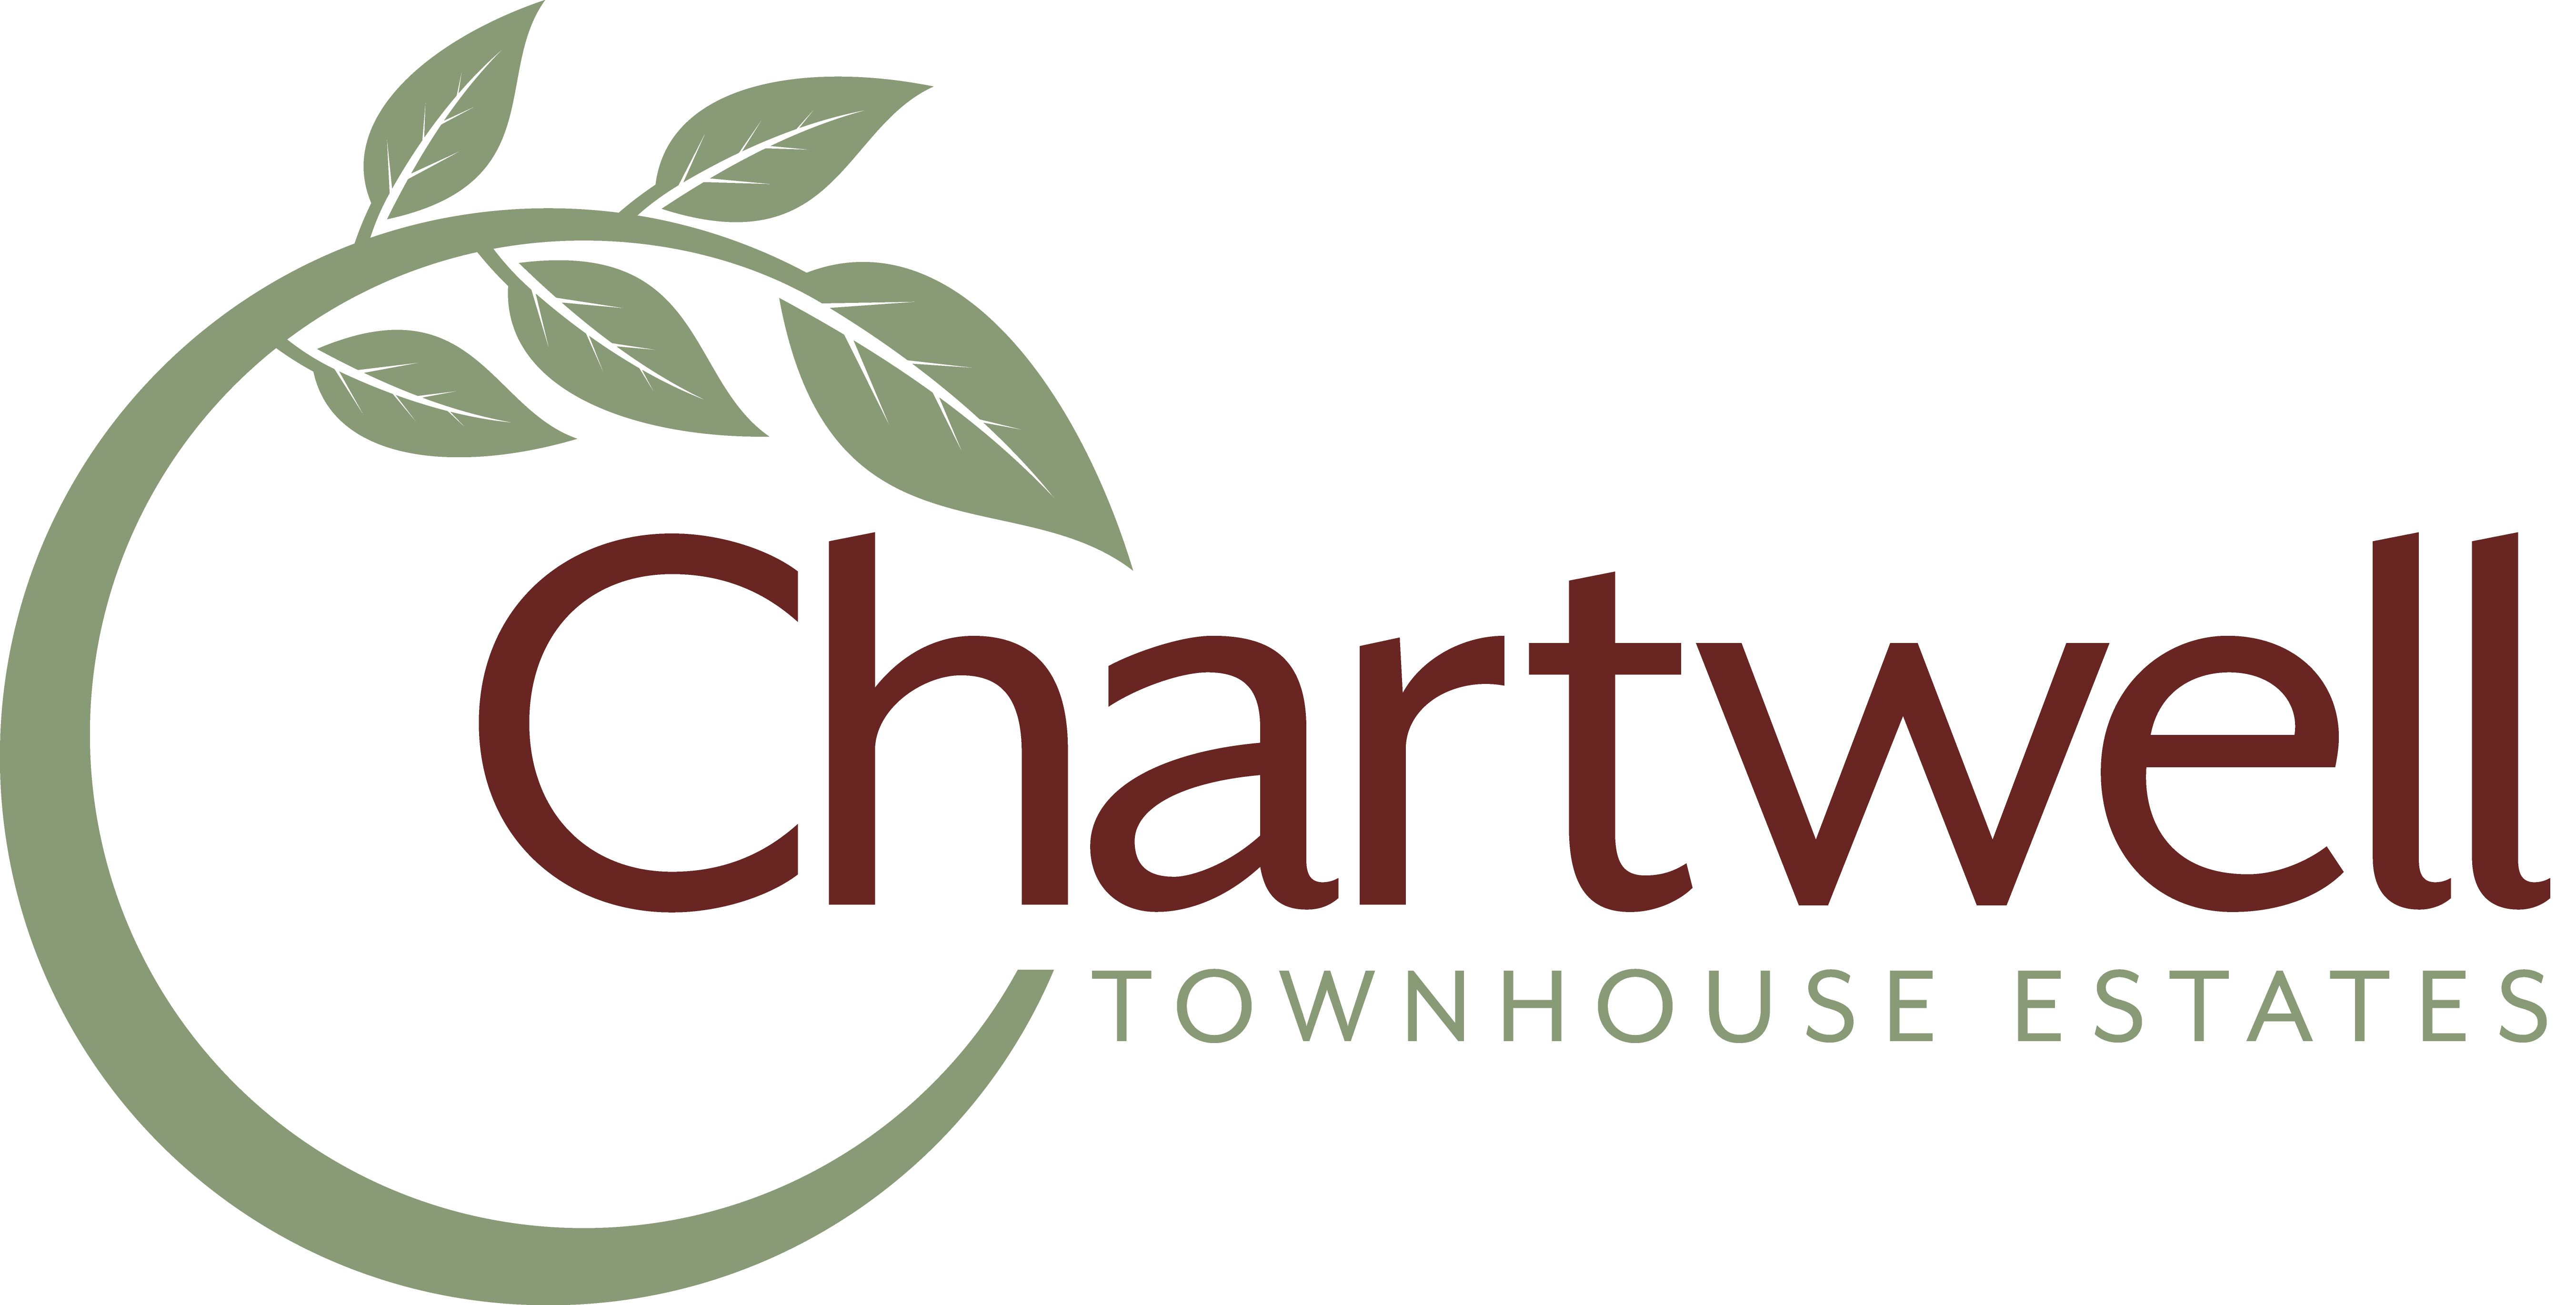 Townhouse Logo - Apartments in Rochester, NY | Chartwell Townhouse Estates in ...